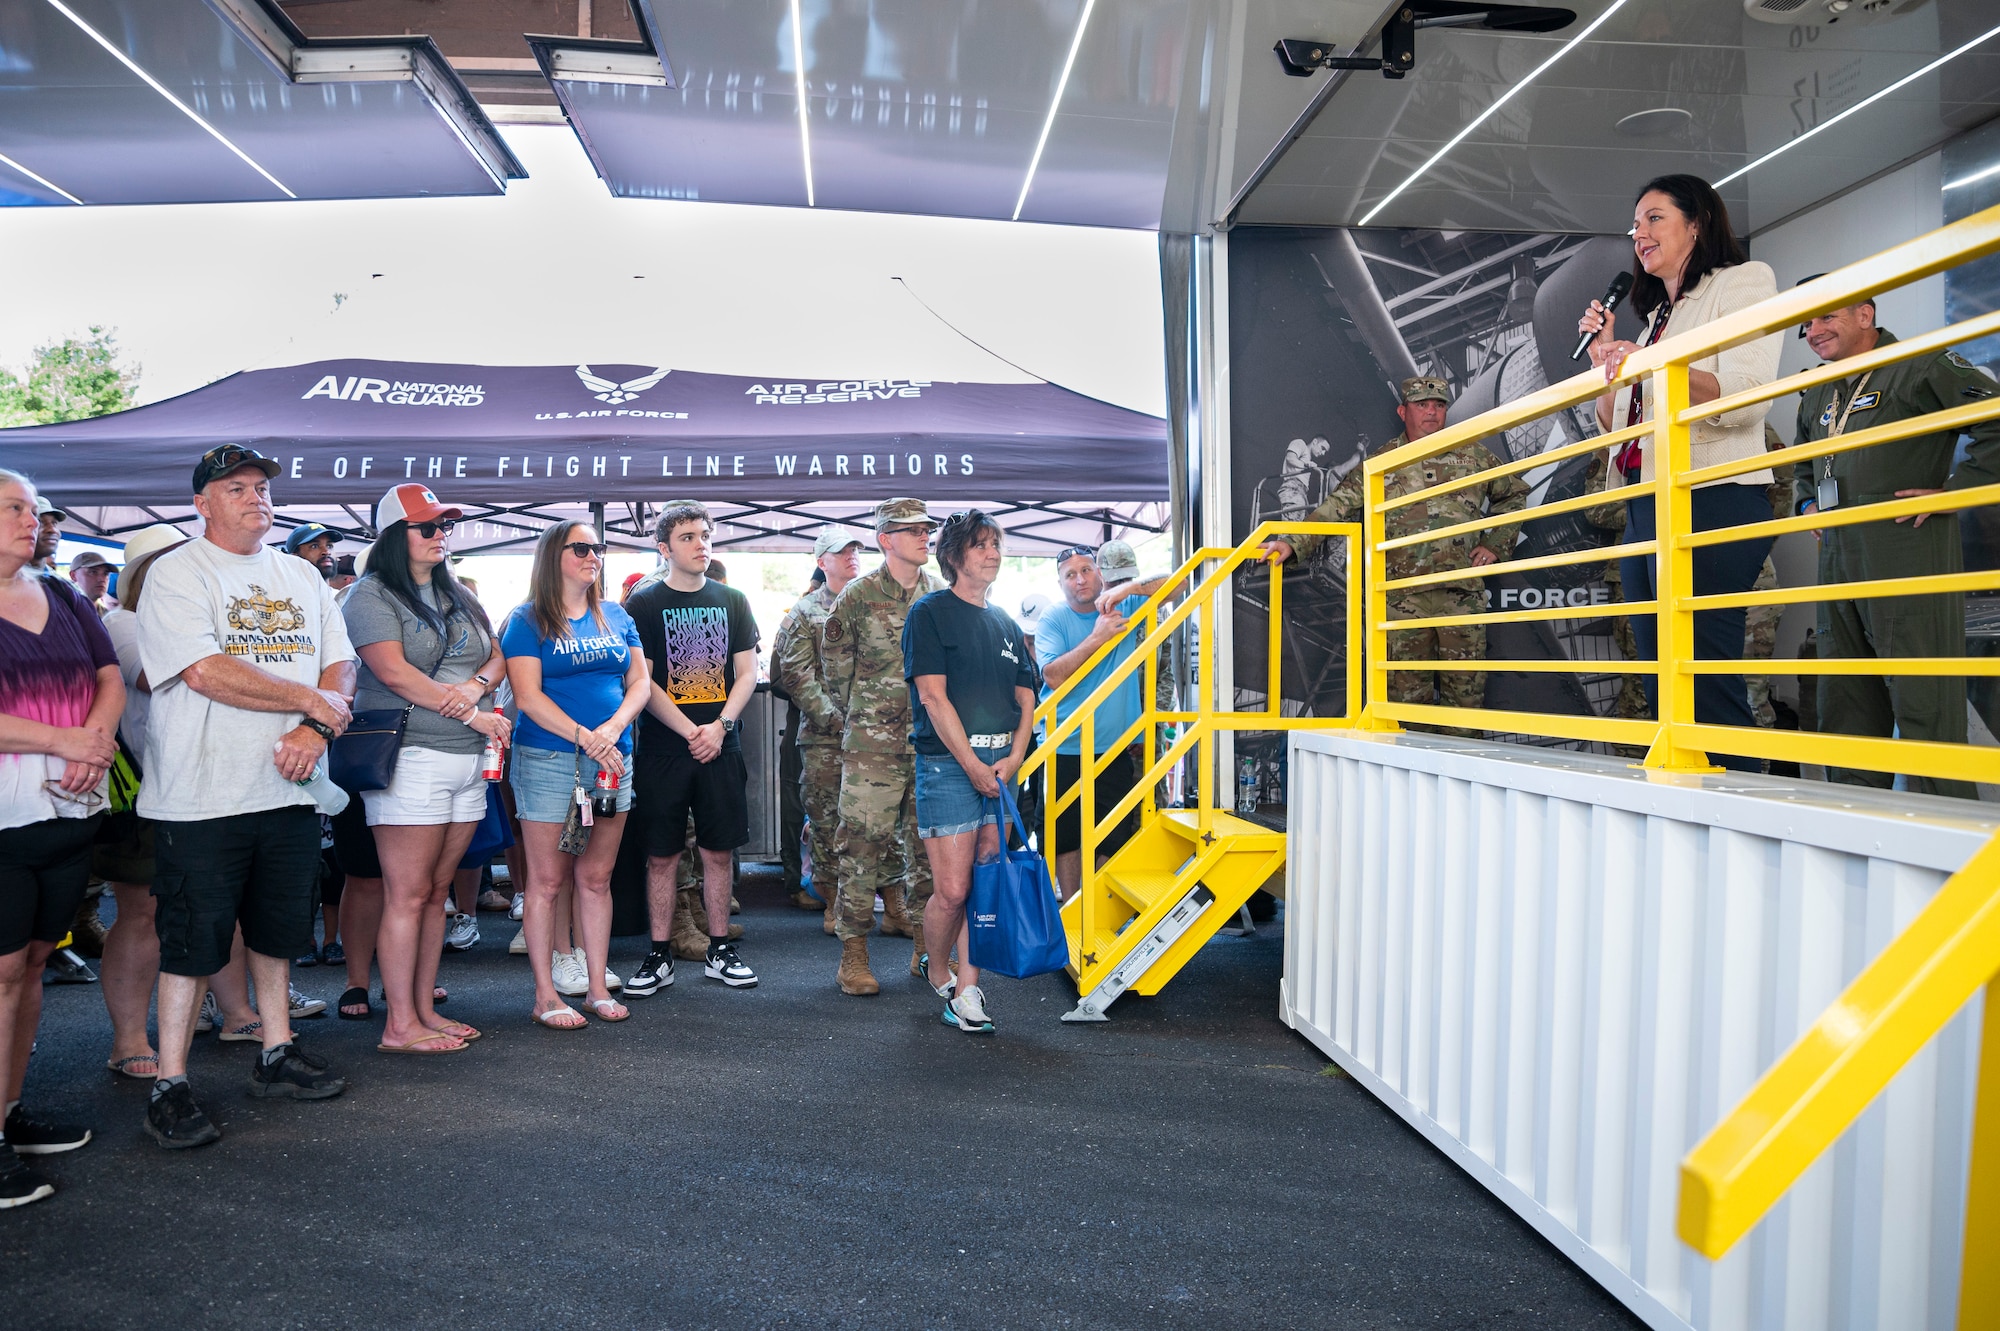 Kristyn Jones, assistant secretary of the Air Force for financial management and comptroller, performing the duties of the under secretary of the Air Force, speaks to Delayed Entry Program members and their families at Pocono Raceway, Pa., July 23, 2023. Jones visited the raceway to participate in the Air Force recruiting mission at the NASCAR Cup Series race as part of a longstanding partnership with Legacy Motor Club. (U.S. Air Force photo by Staff Sgt. Jacob B. Derry)